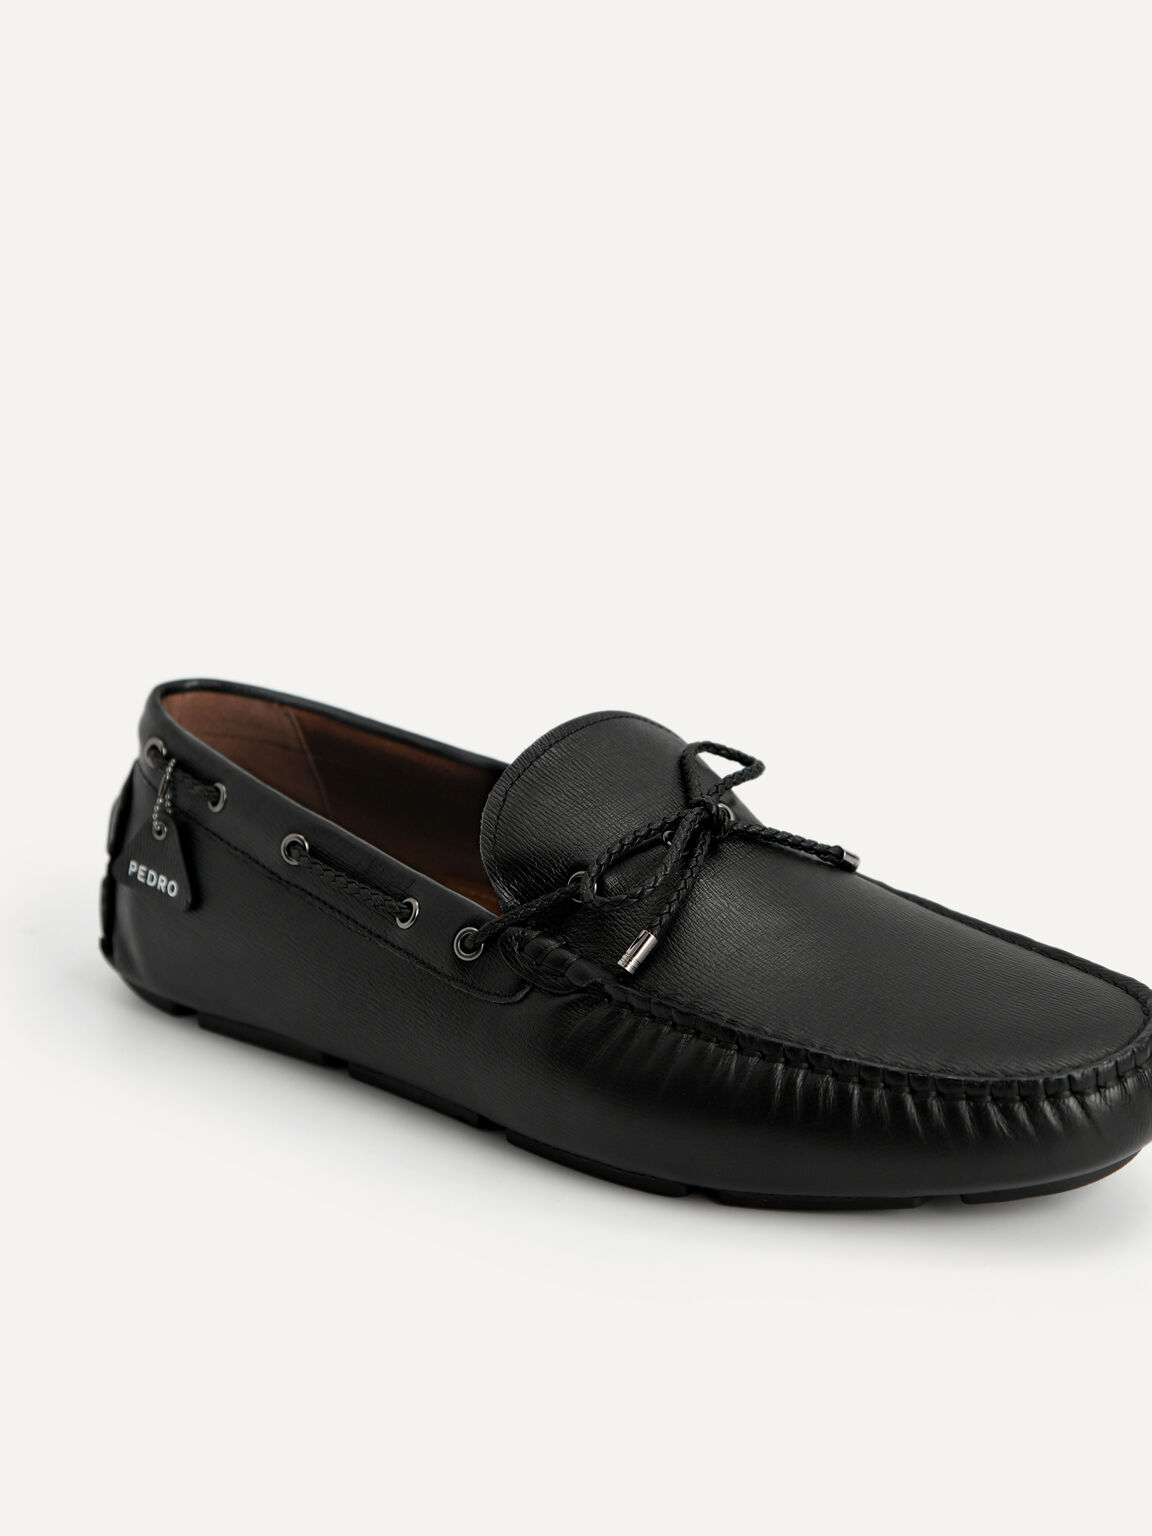 Textured Leather Moccasins, Black